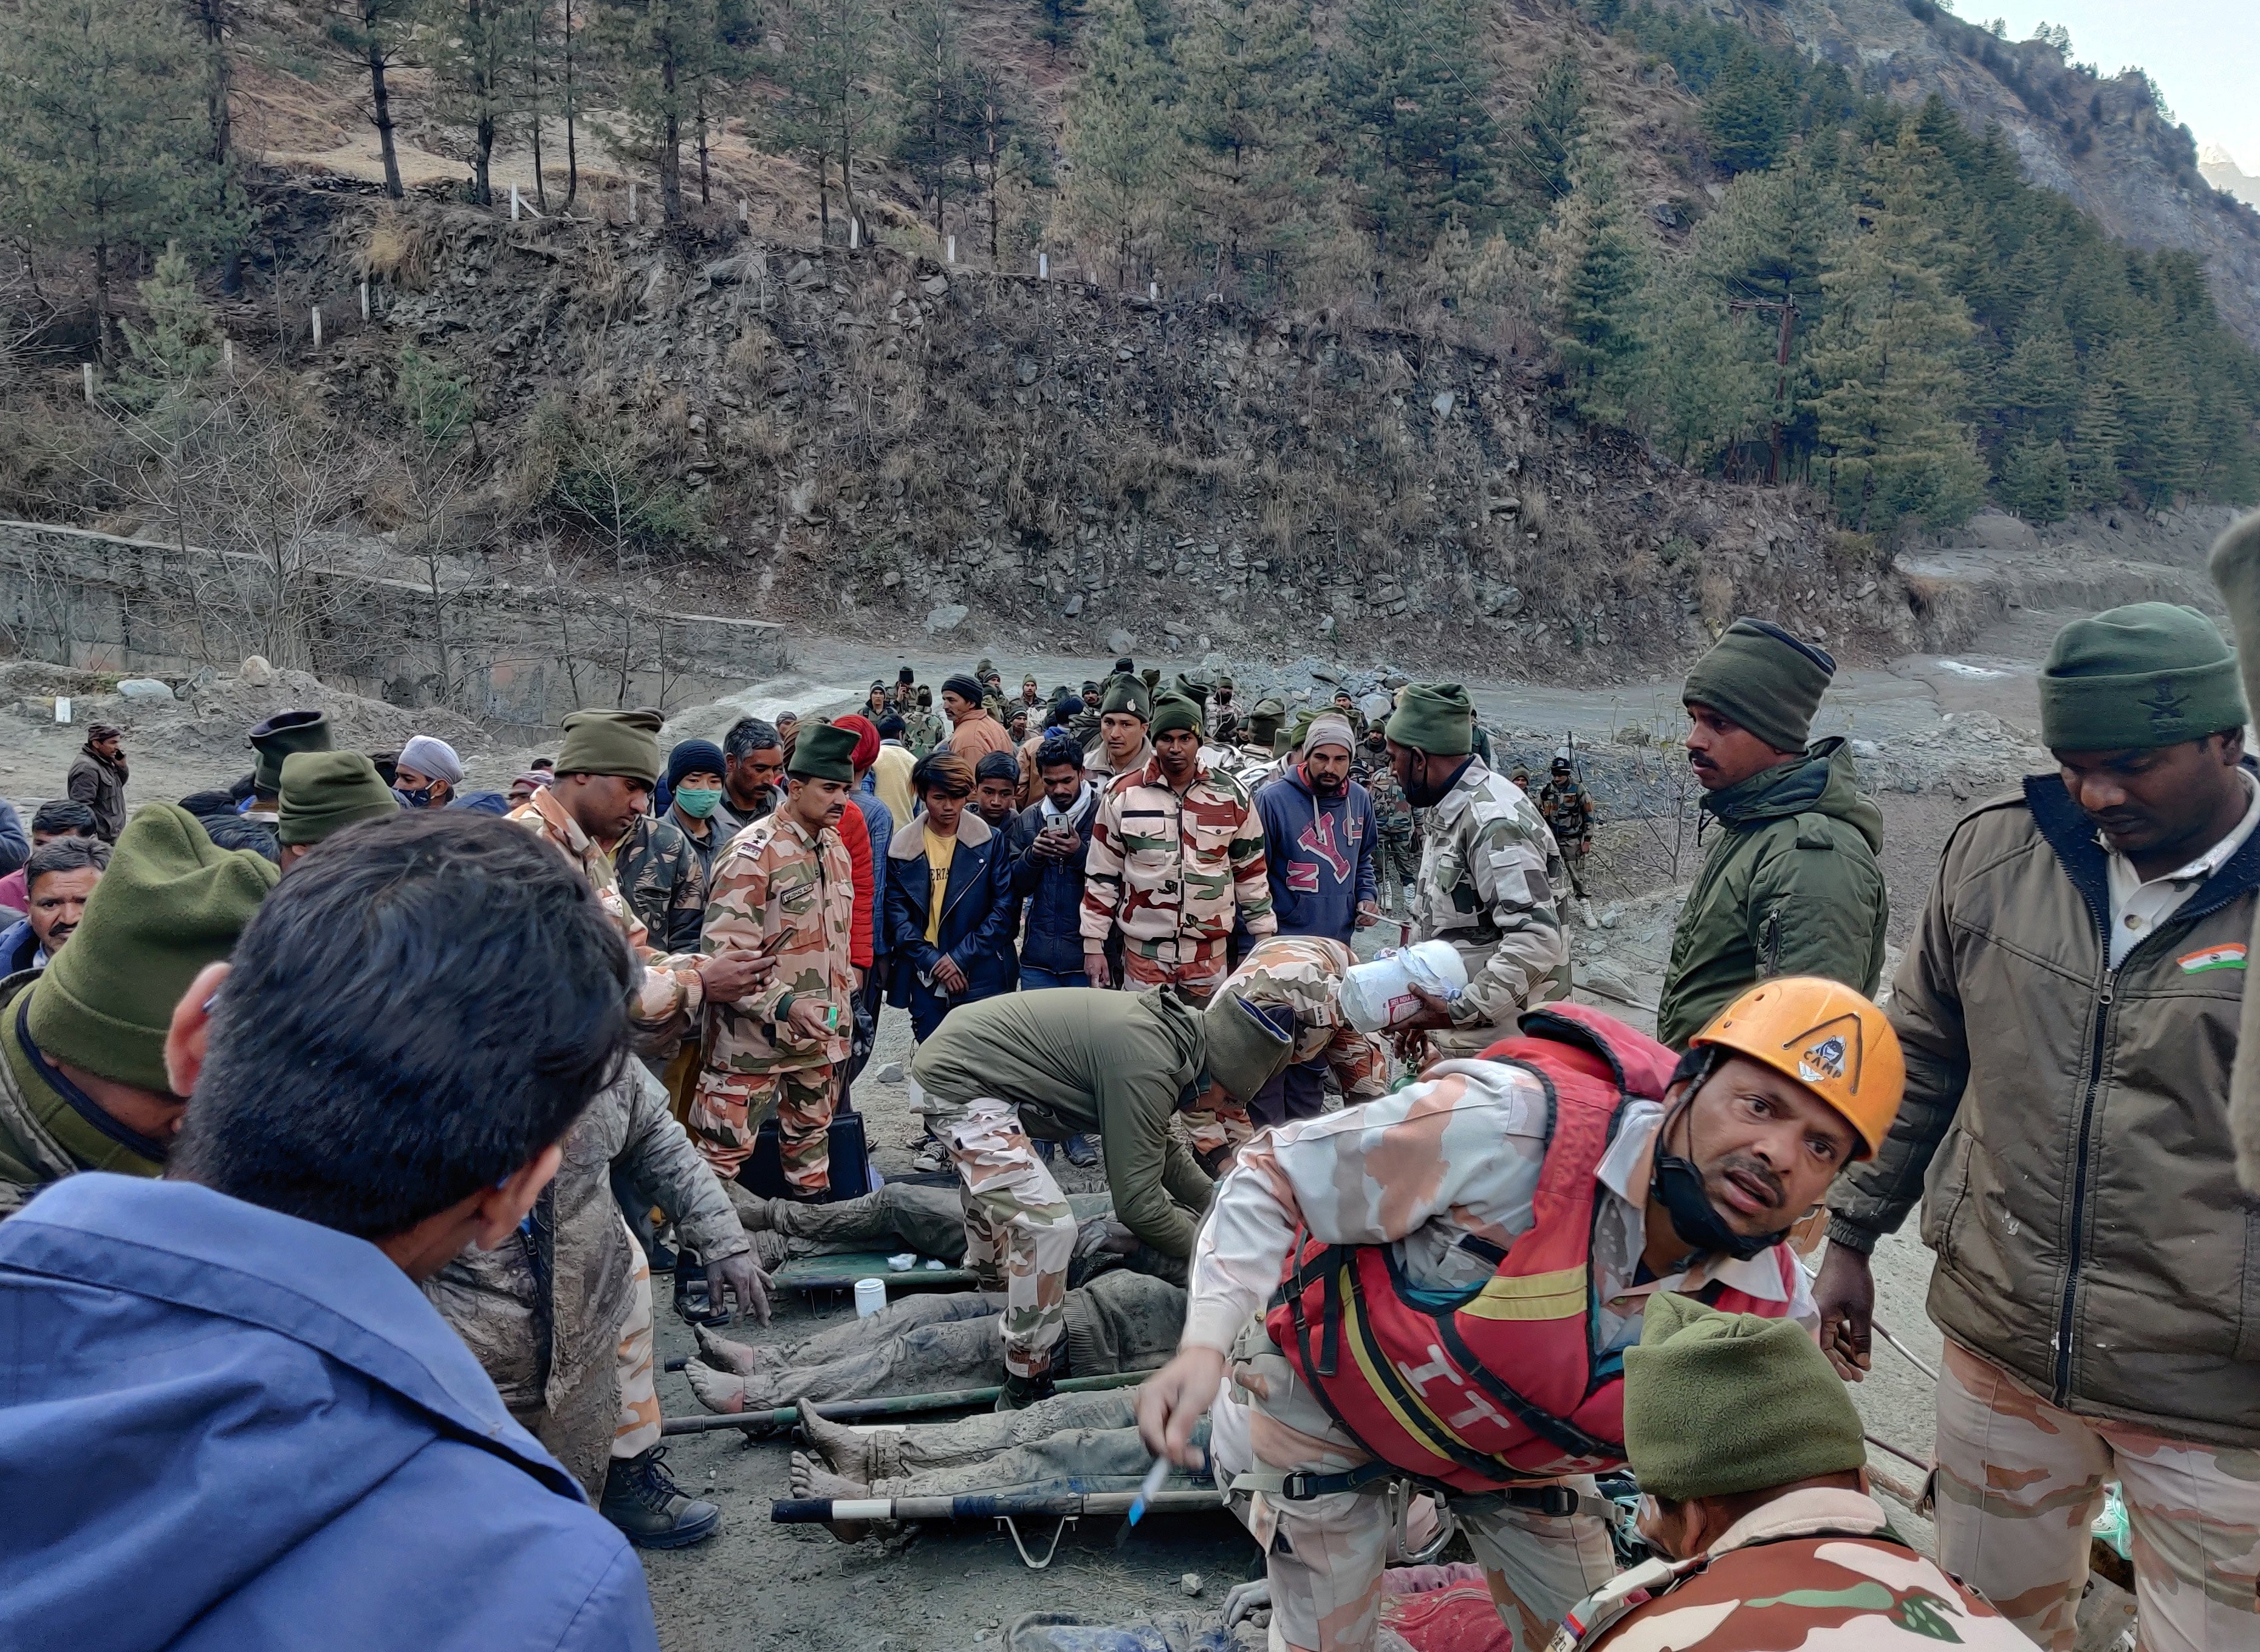 Members of Indo-Tibetan border police tend to people rescued after a Himalayan glacier incident